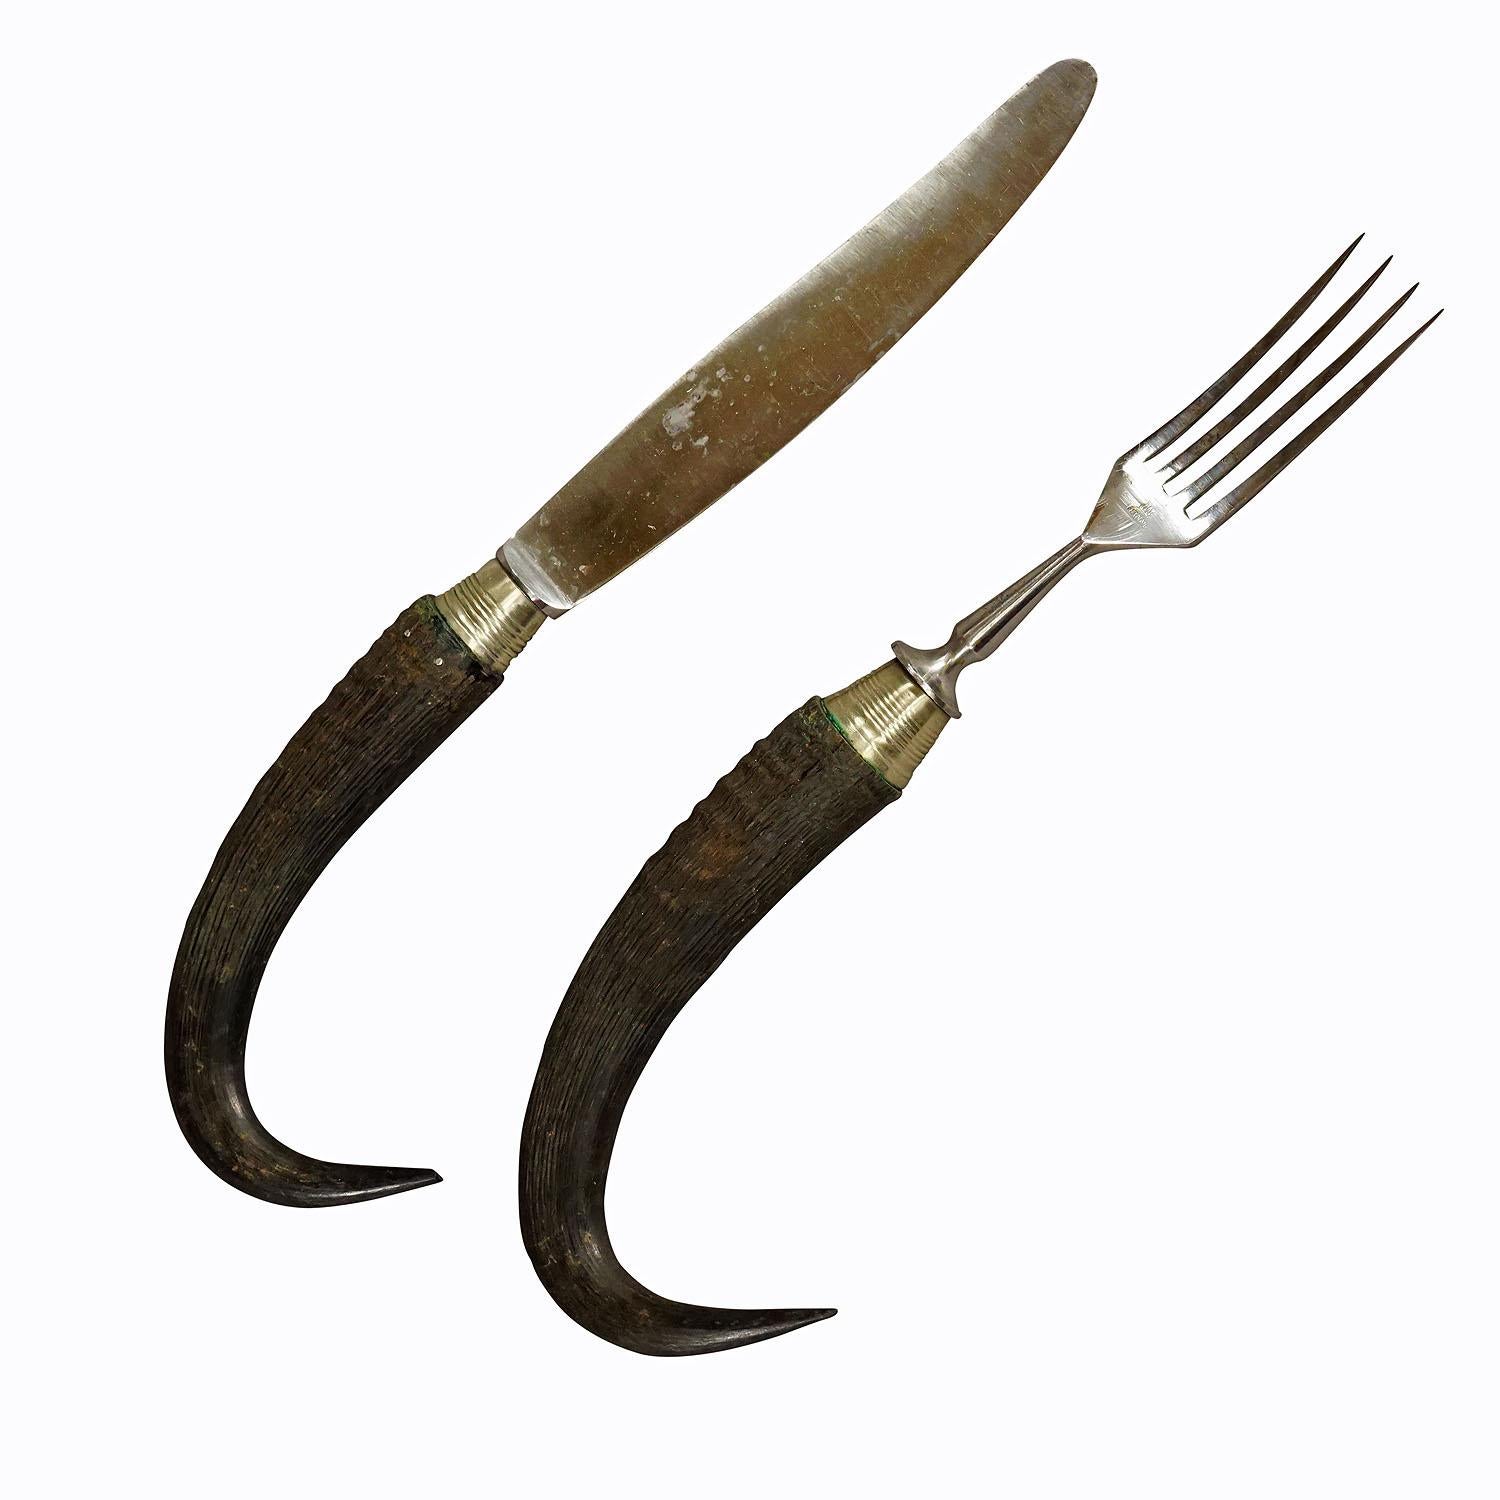 Antique set of rustic hunters cutlery with Chamois Horn Handles

A rare antique set of knife and fork. The handles are made of genuine chamois horn. Tines and blade are made of galvanized metal. Manufactured in Germany around 1900. This type of